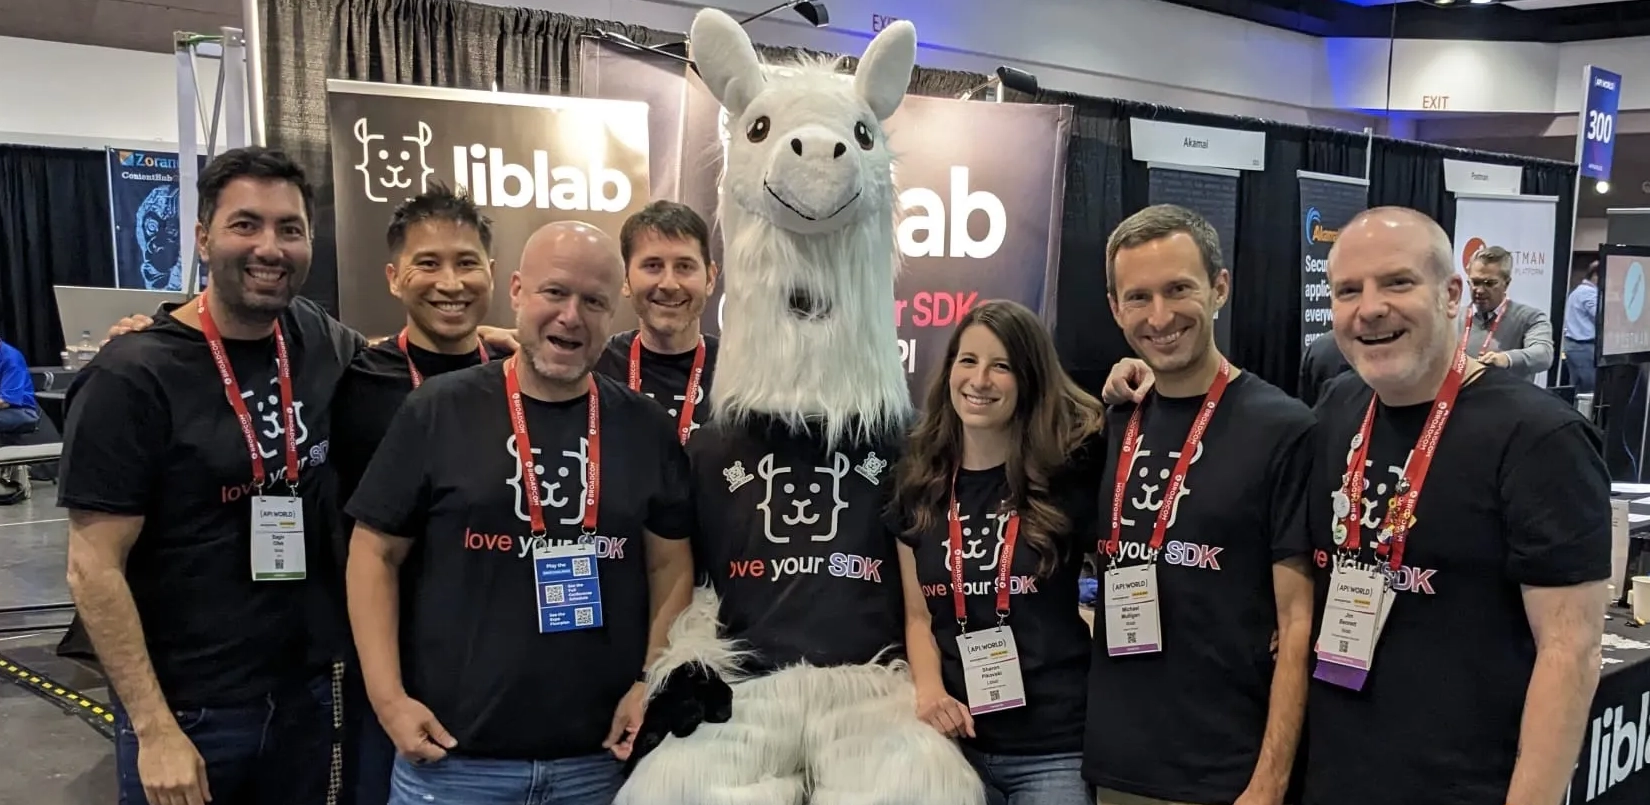 A group of people wearing liblab love your SDK shirts posing with a large llama mascot also wearing the same shirt. Behind the group is the liblab booth from API world